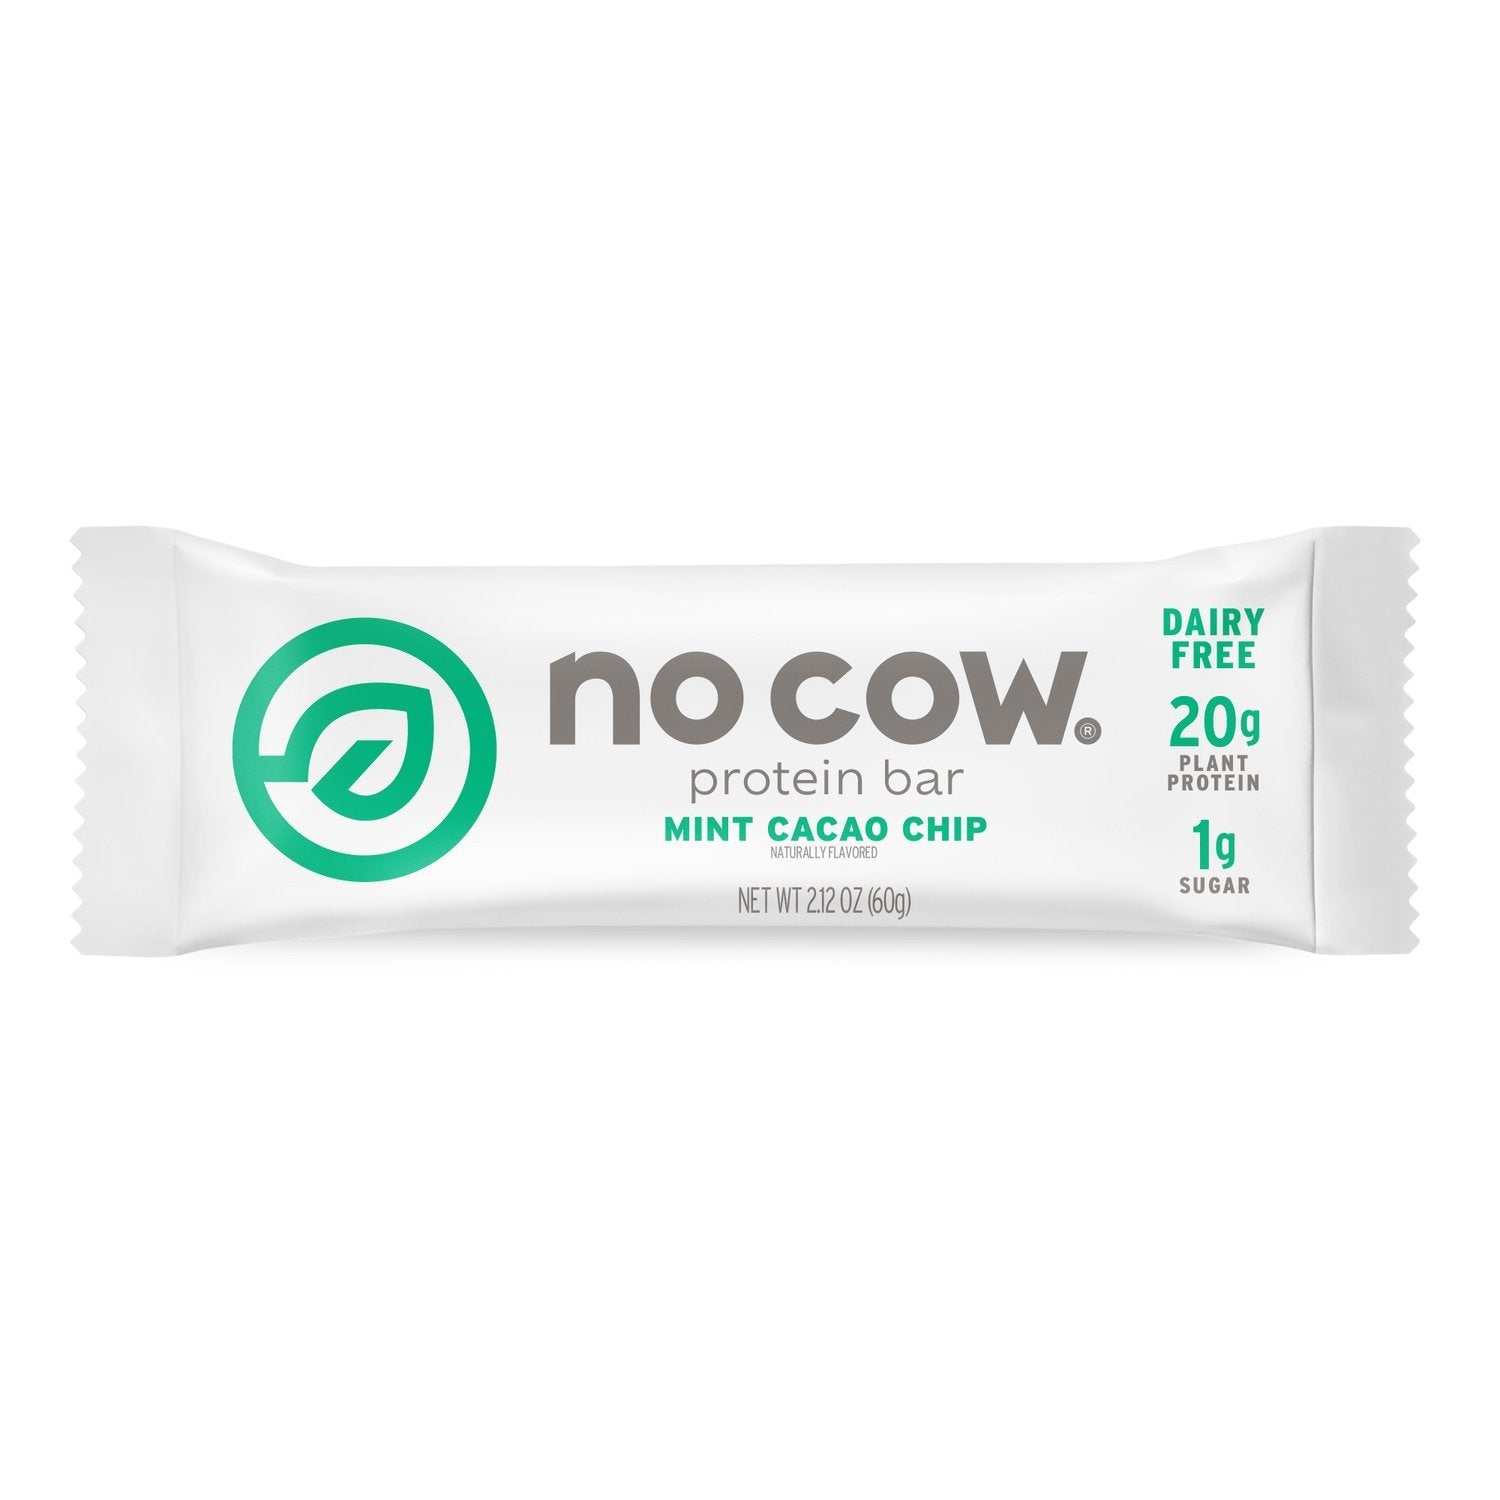 No Cow Plant Based Protein Bars No Cow Mint Cacao Chip 2.12 Ounce 